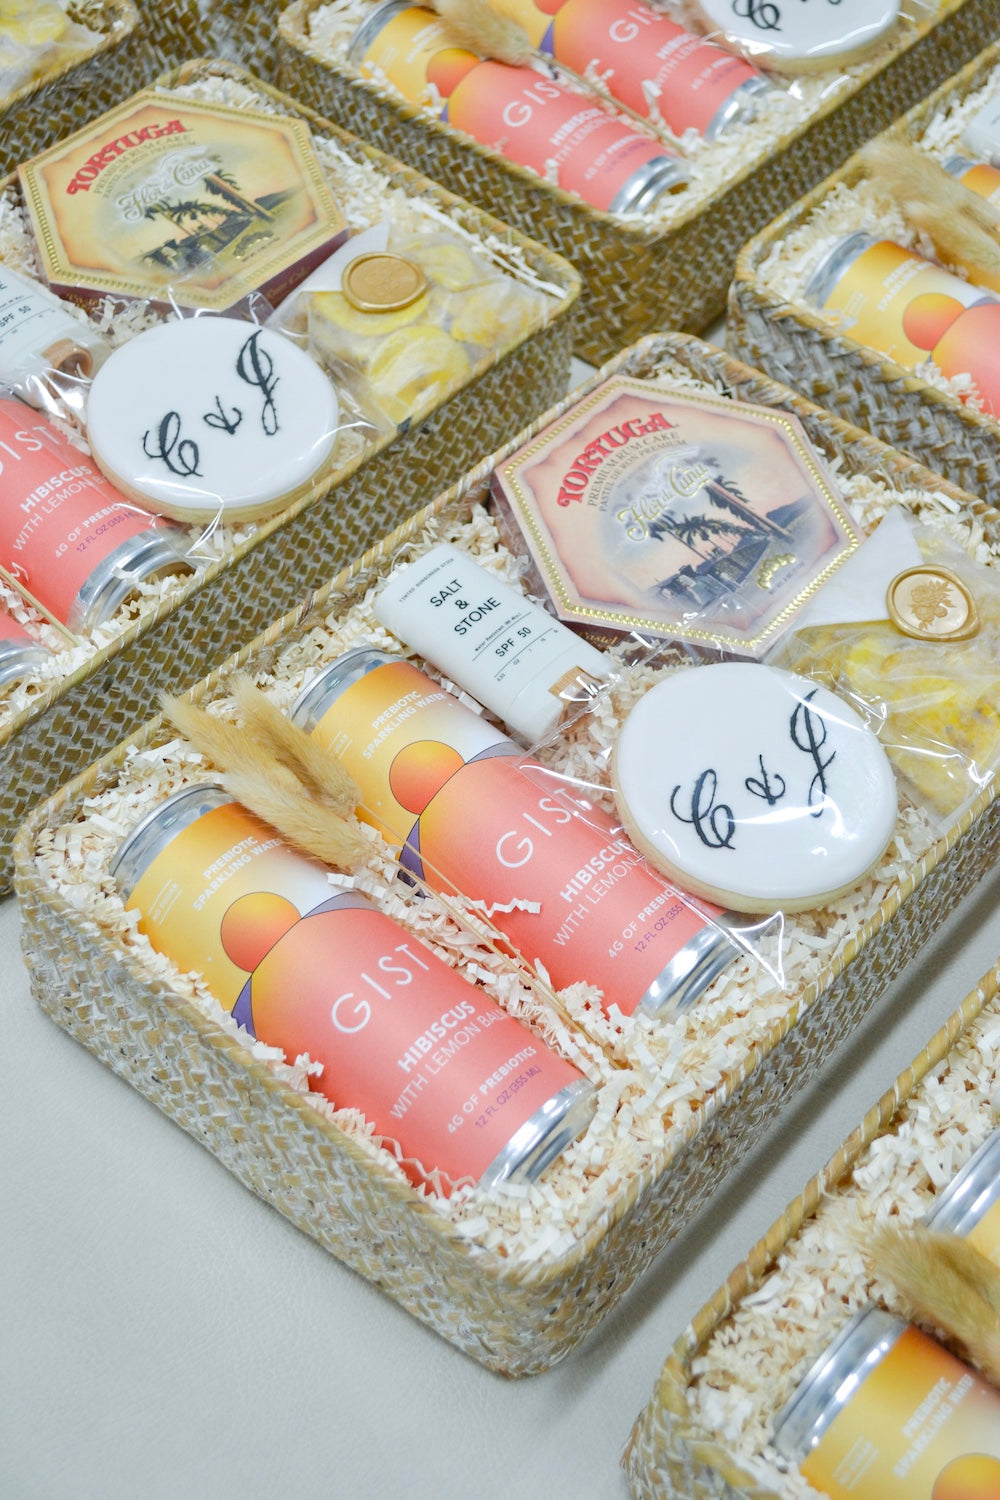 Wedding Welcome Gift Boxes for Guests